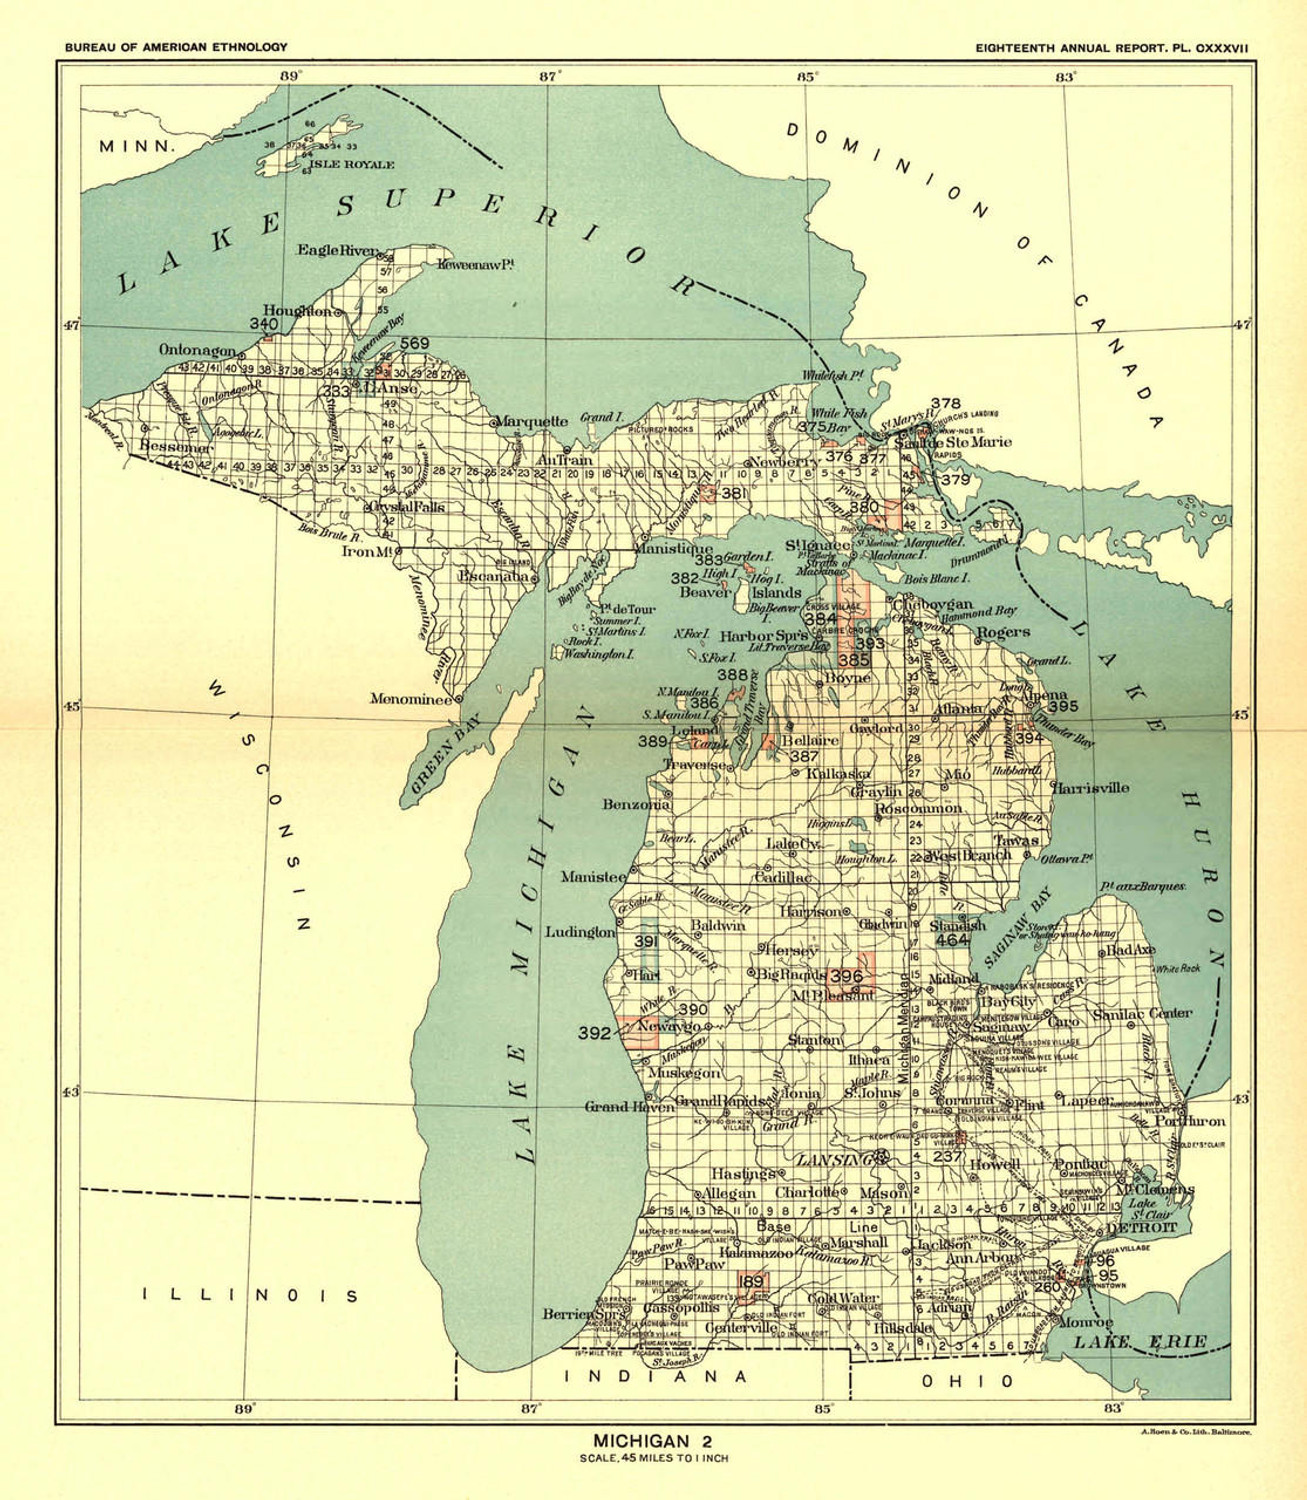  Historical Map of Michigan - Indian Lands - 1896 - J.W. Powell